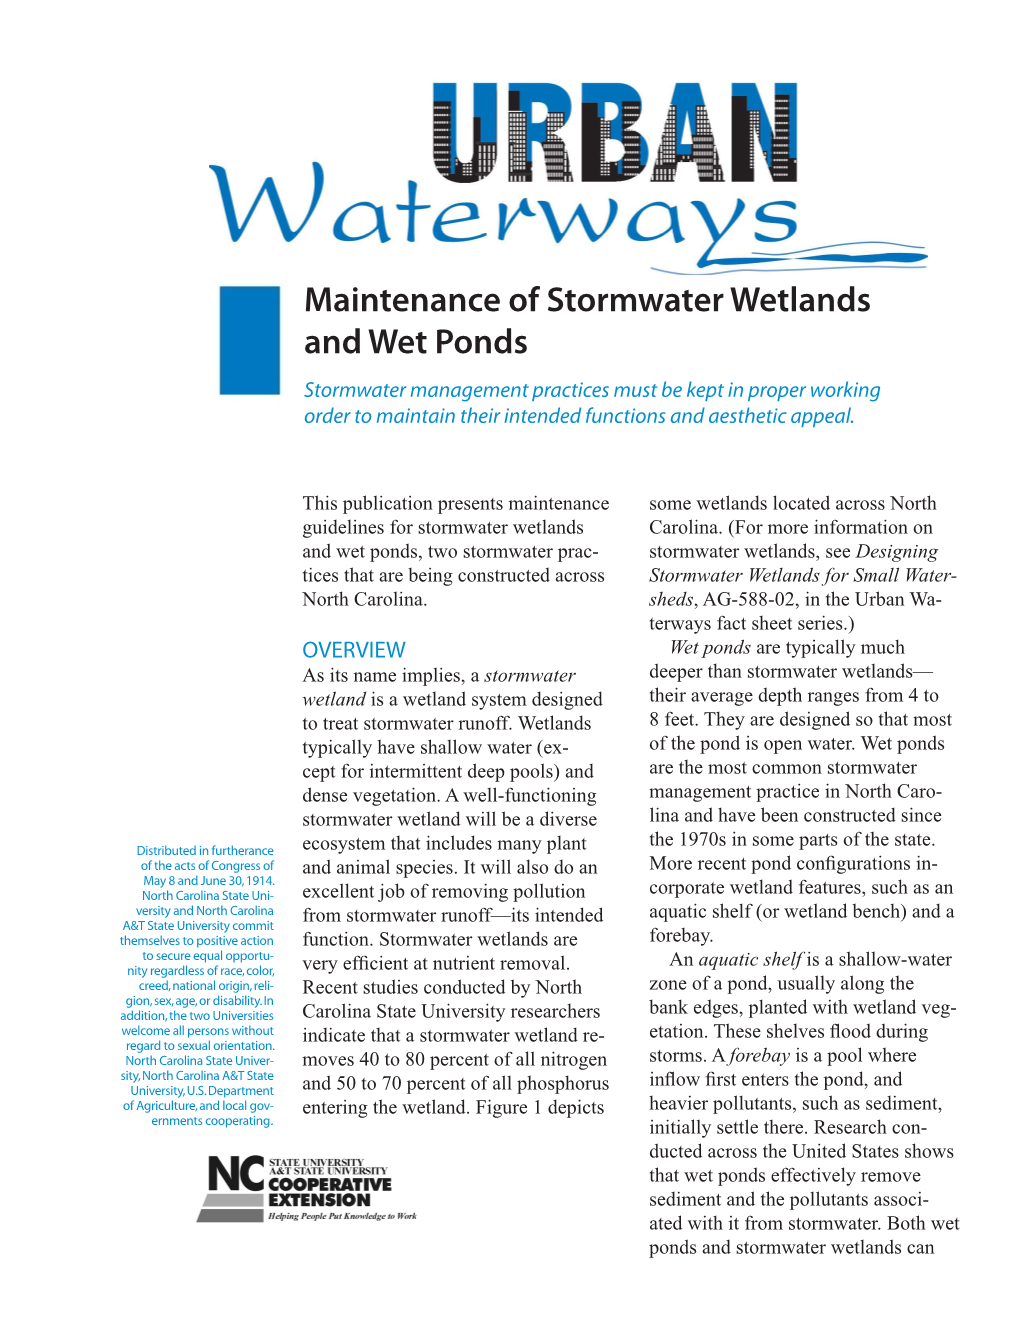 Maintenance of Stormwater Wetlands and Wet Ponds